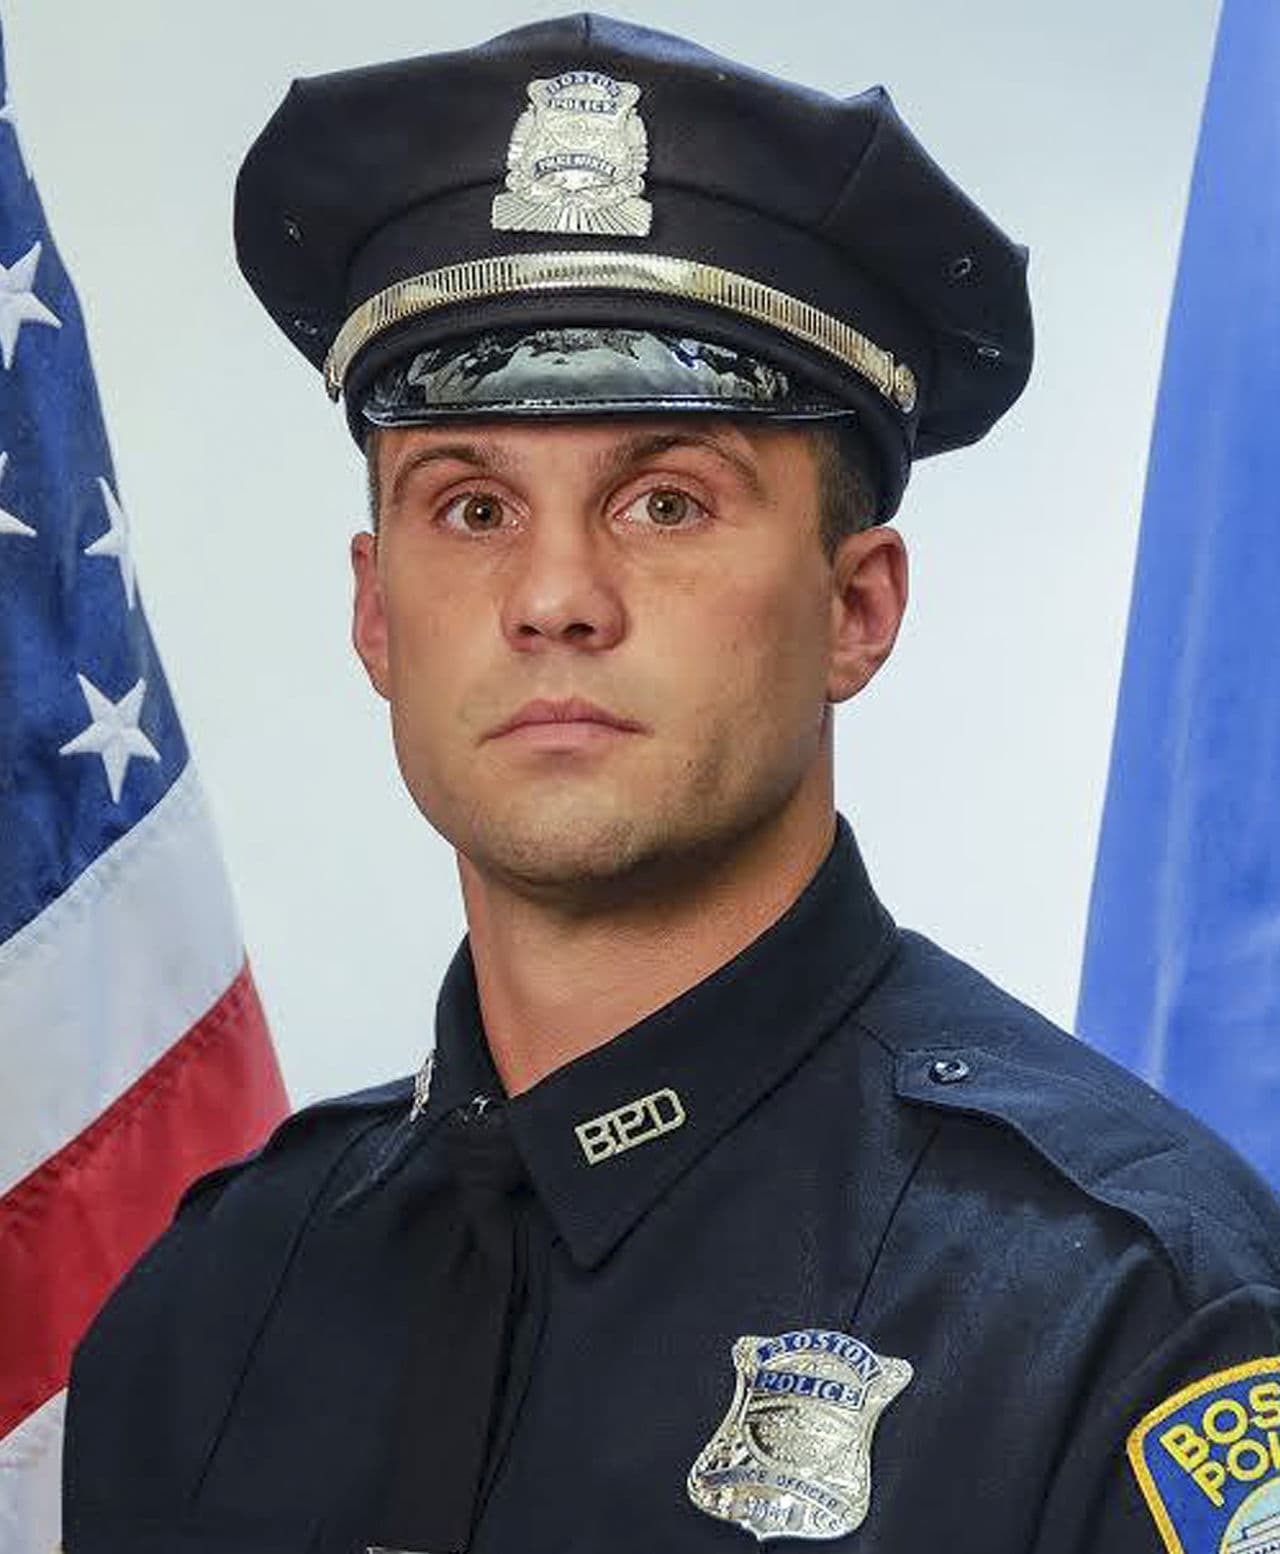 Officer John Moynihan, 34, was shot in the face during a traffic stop Friday night that ended when other officers fatally shot his attacker. (Boston Police Department)